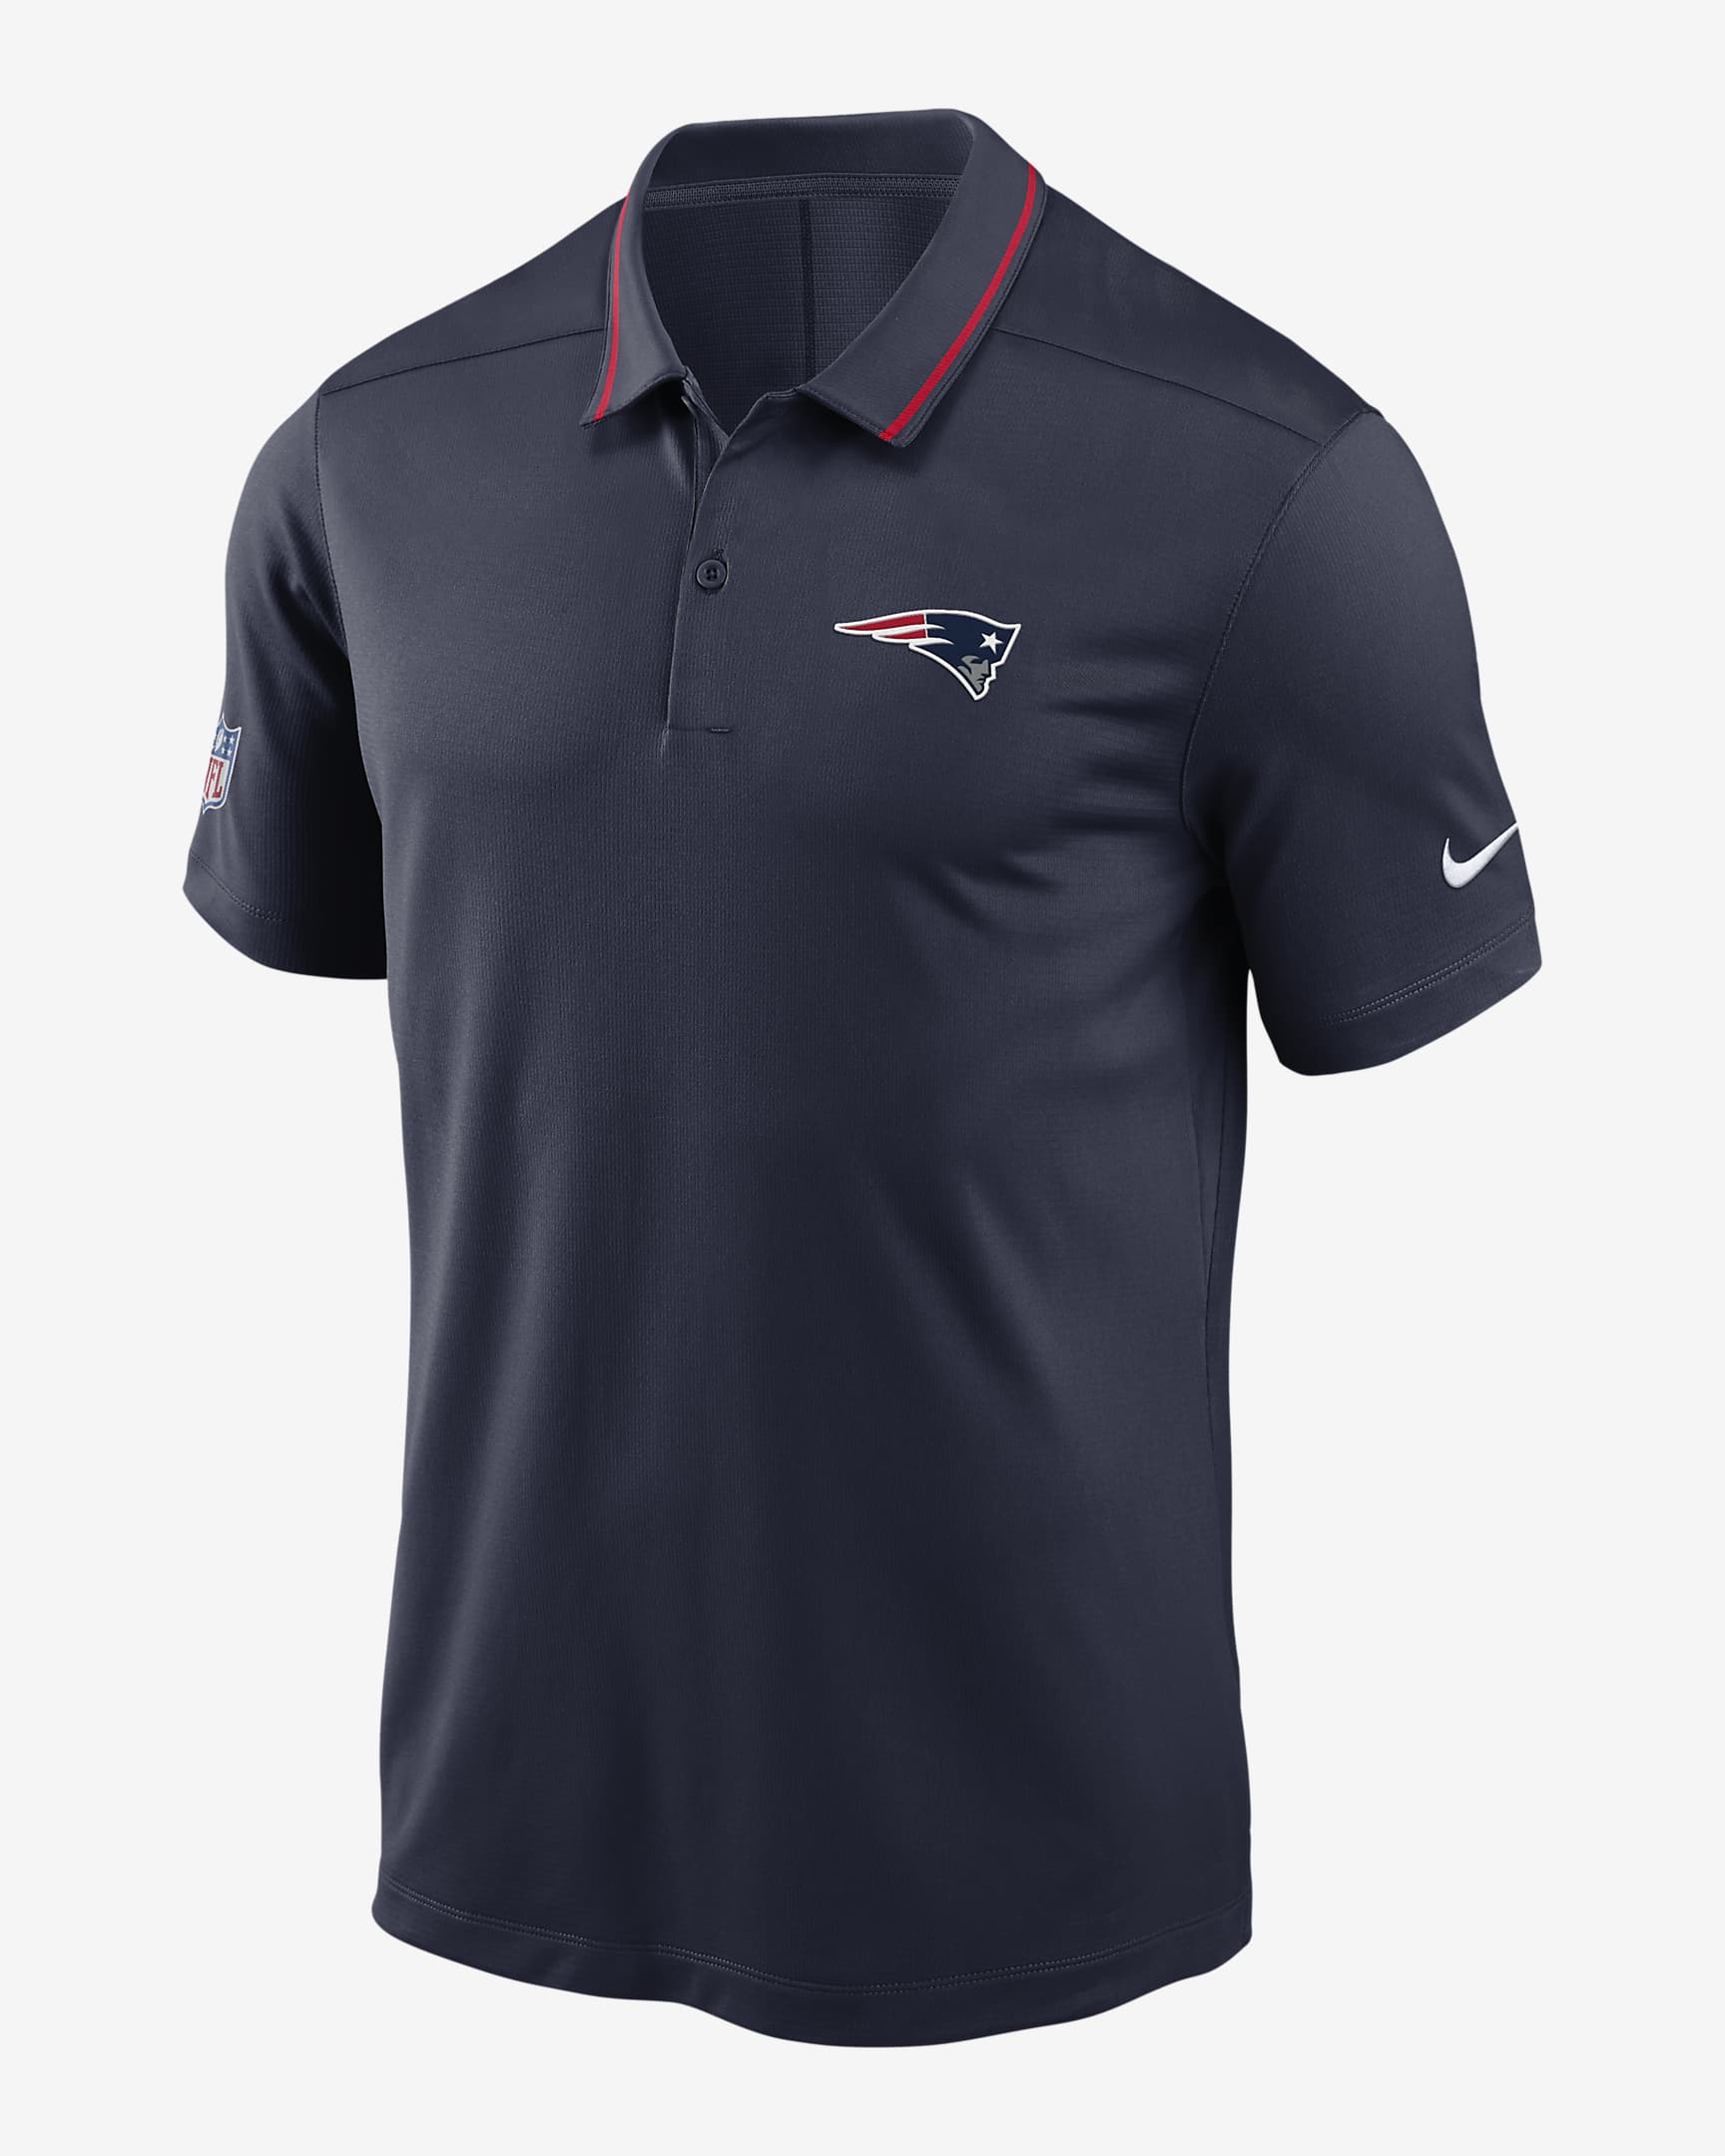 Nike Dri-FIT Sideline Victory (NFL New England Patriots) Men's Polo ...